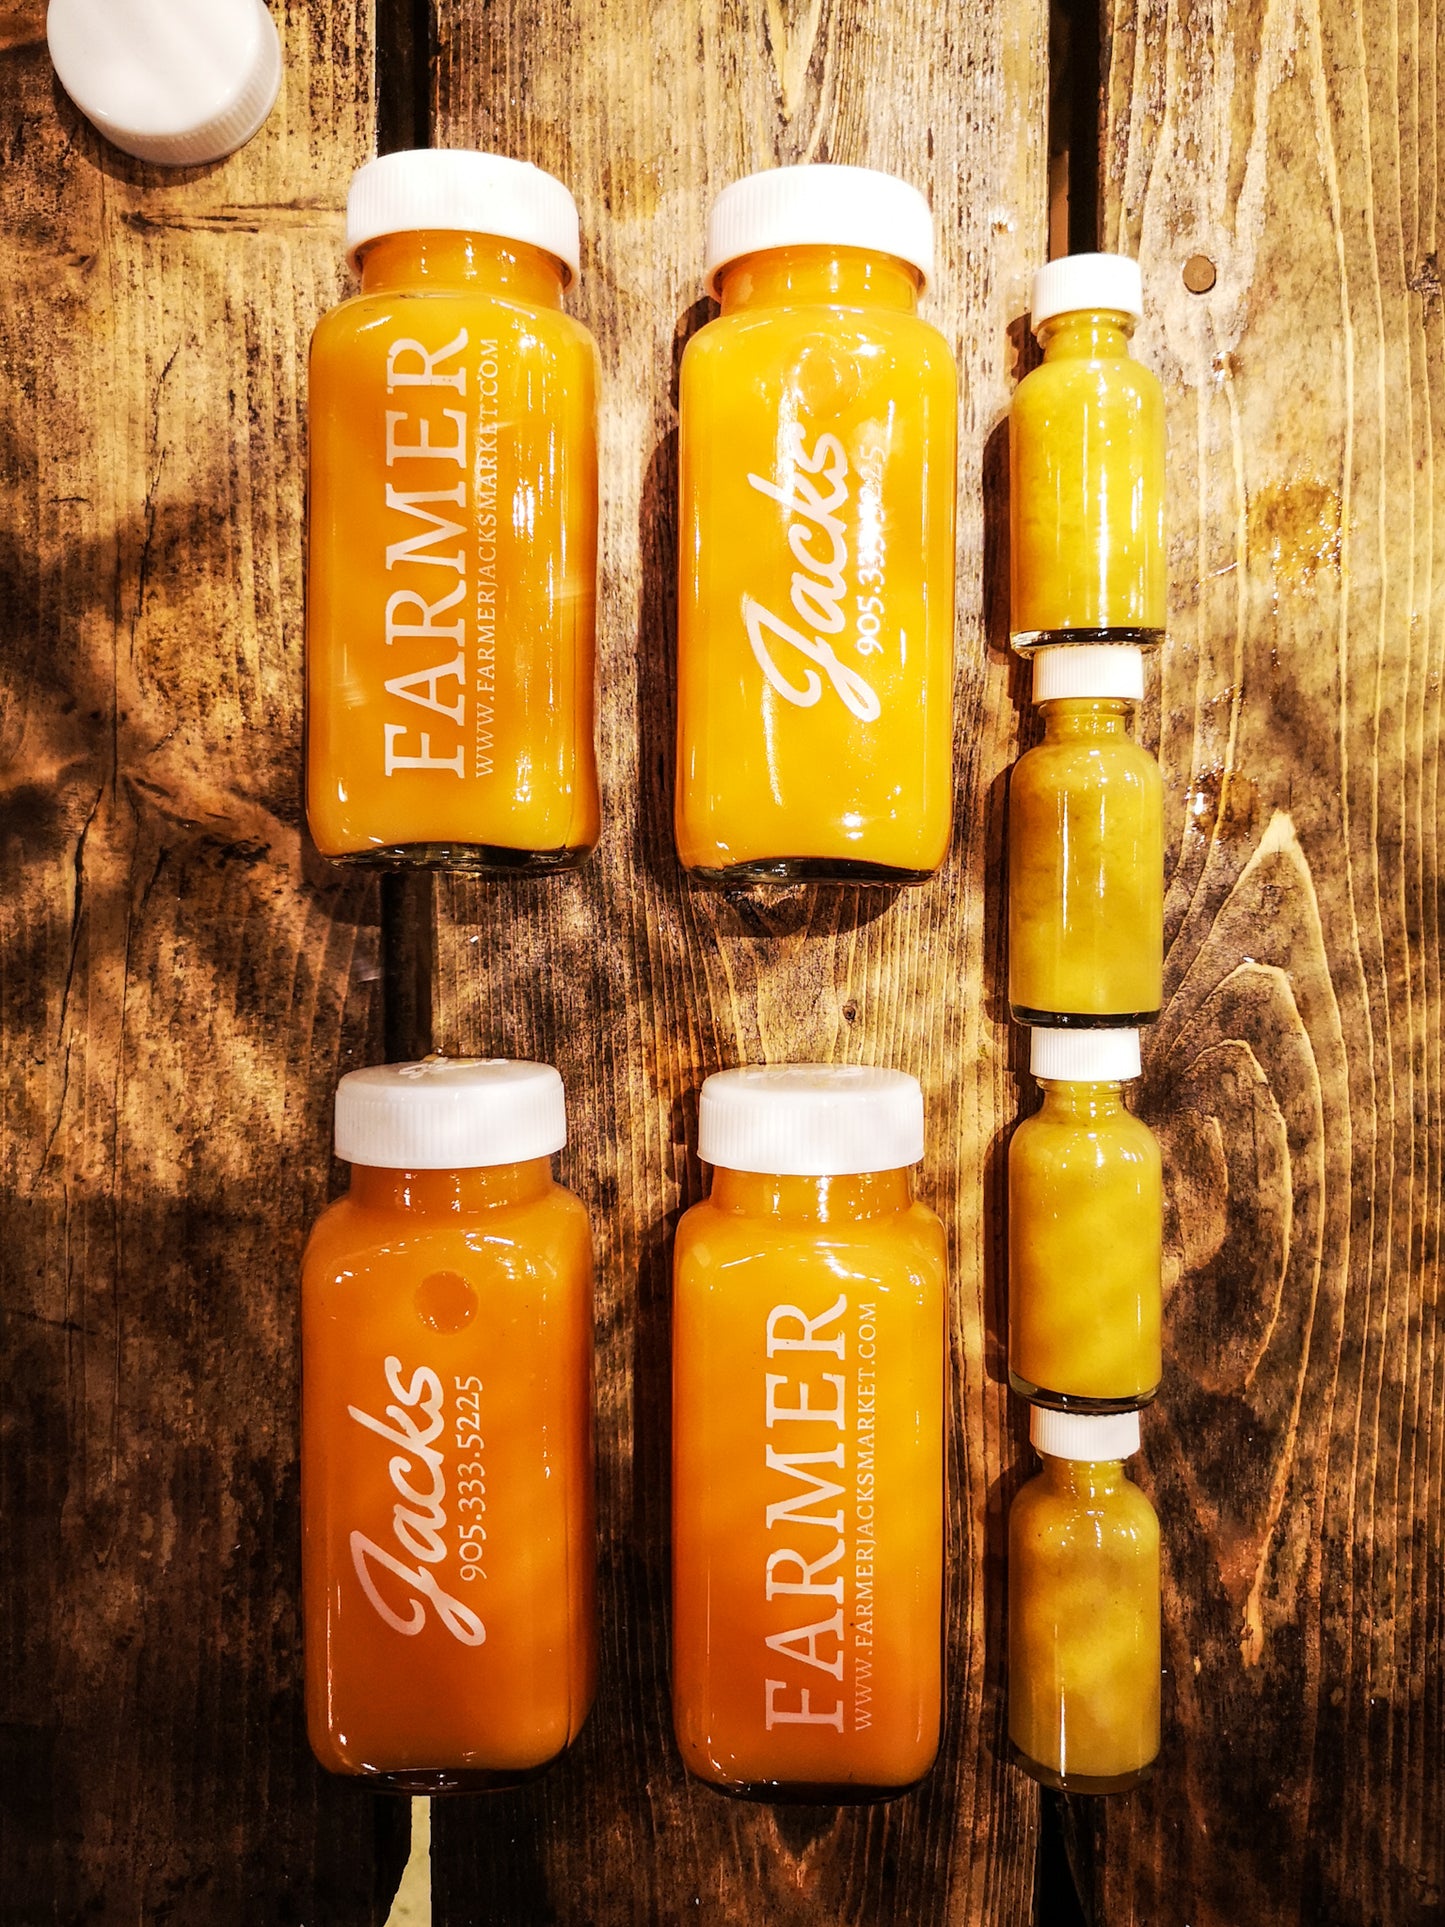 Farmer Jack's Booster Pack - 4x 250ml glass bottles of bright orange Immunity Booster juices, and 4x 1oz bottles of bright yellow Flu Shots. 